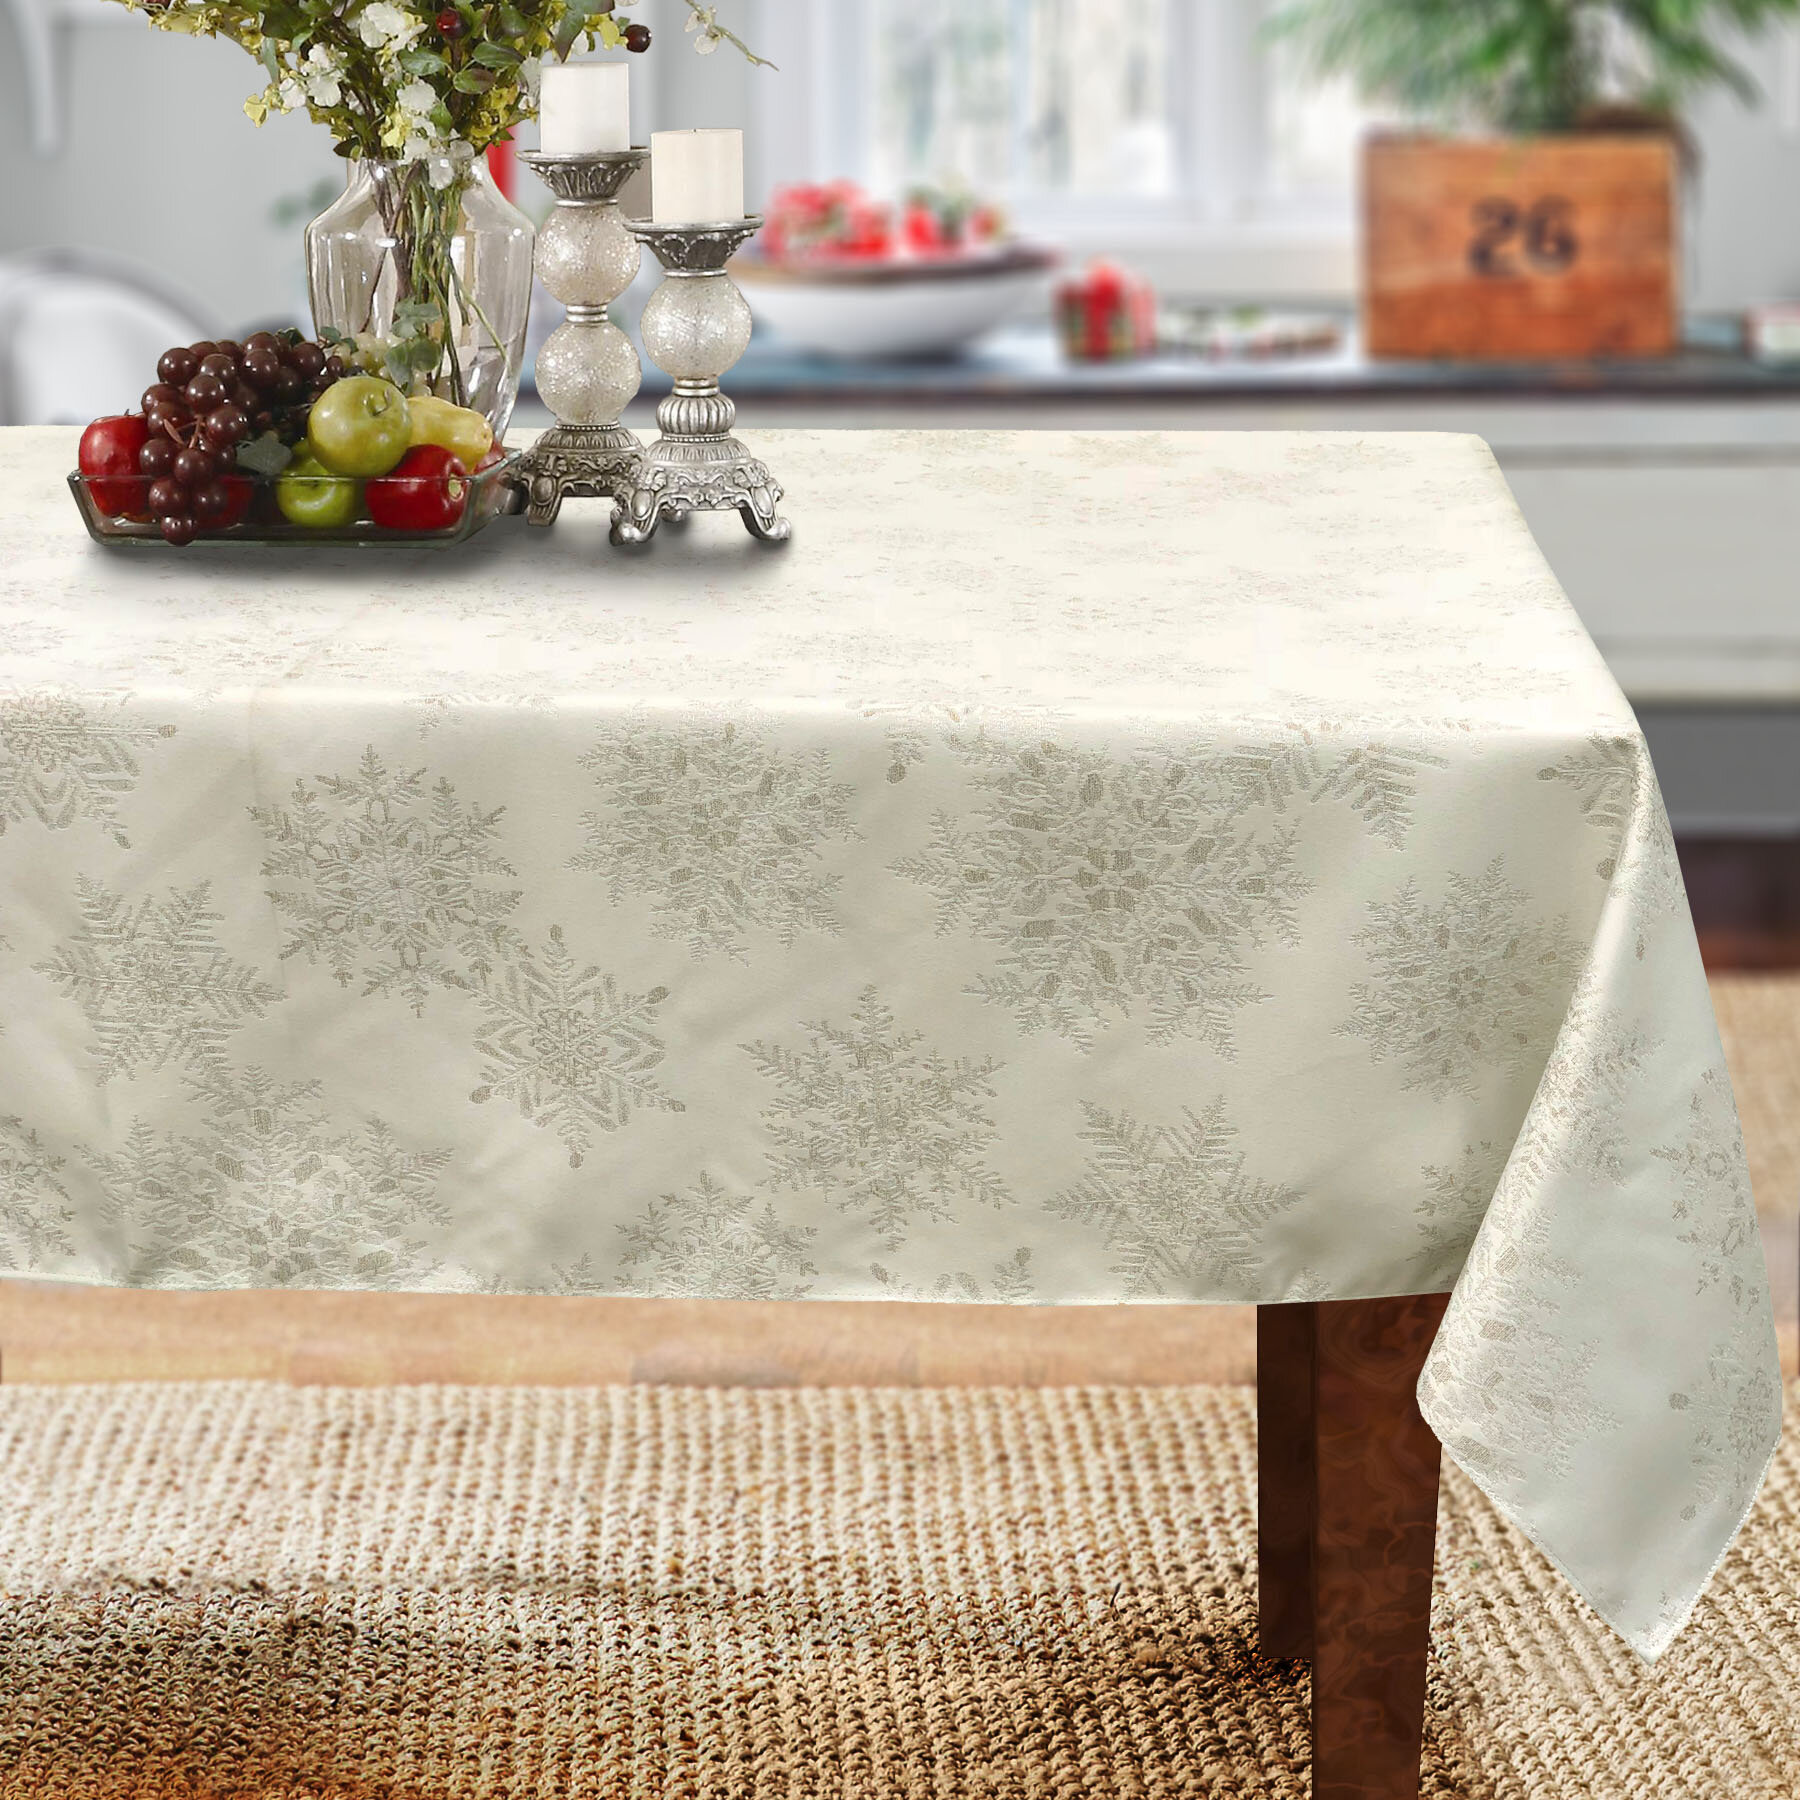 Jacquard Woven Red Christmas Tablecloth with Gold Threads in 4 Sizes